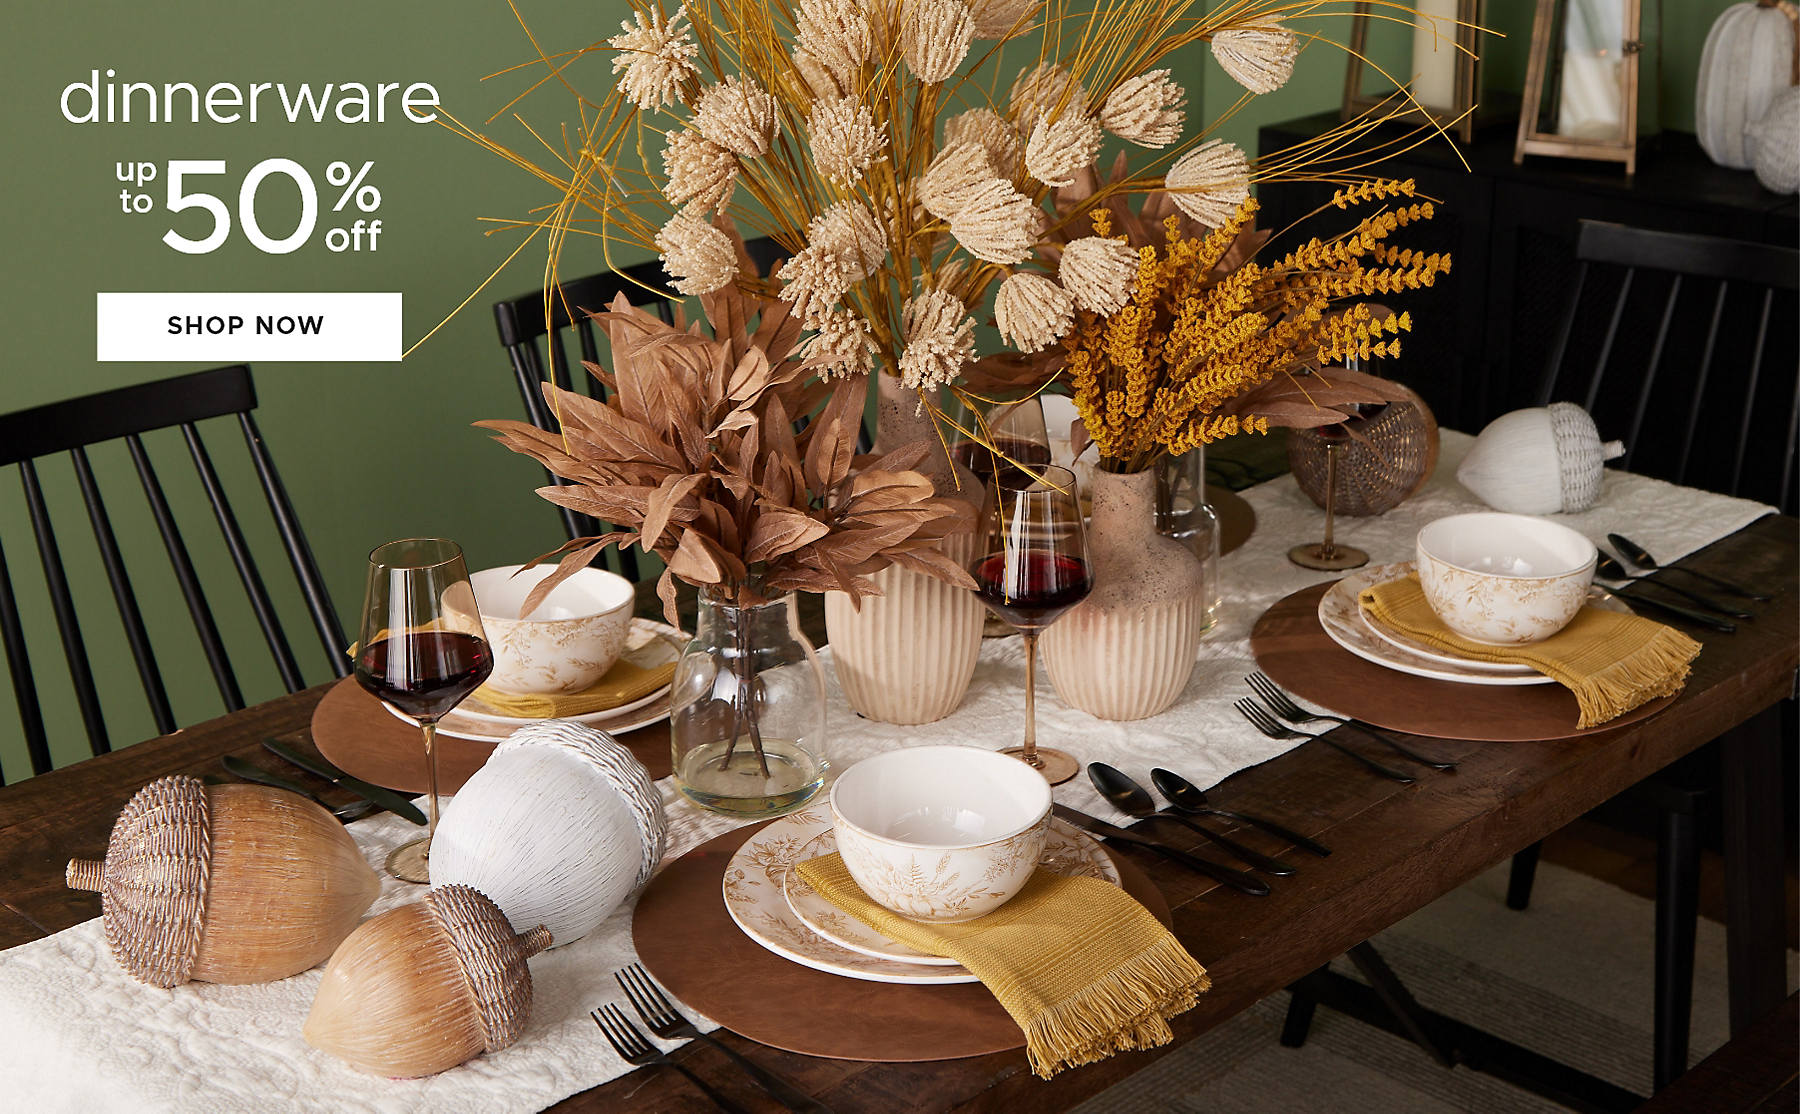 dinnerware up to 50% off shop now